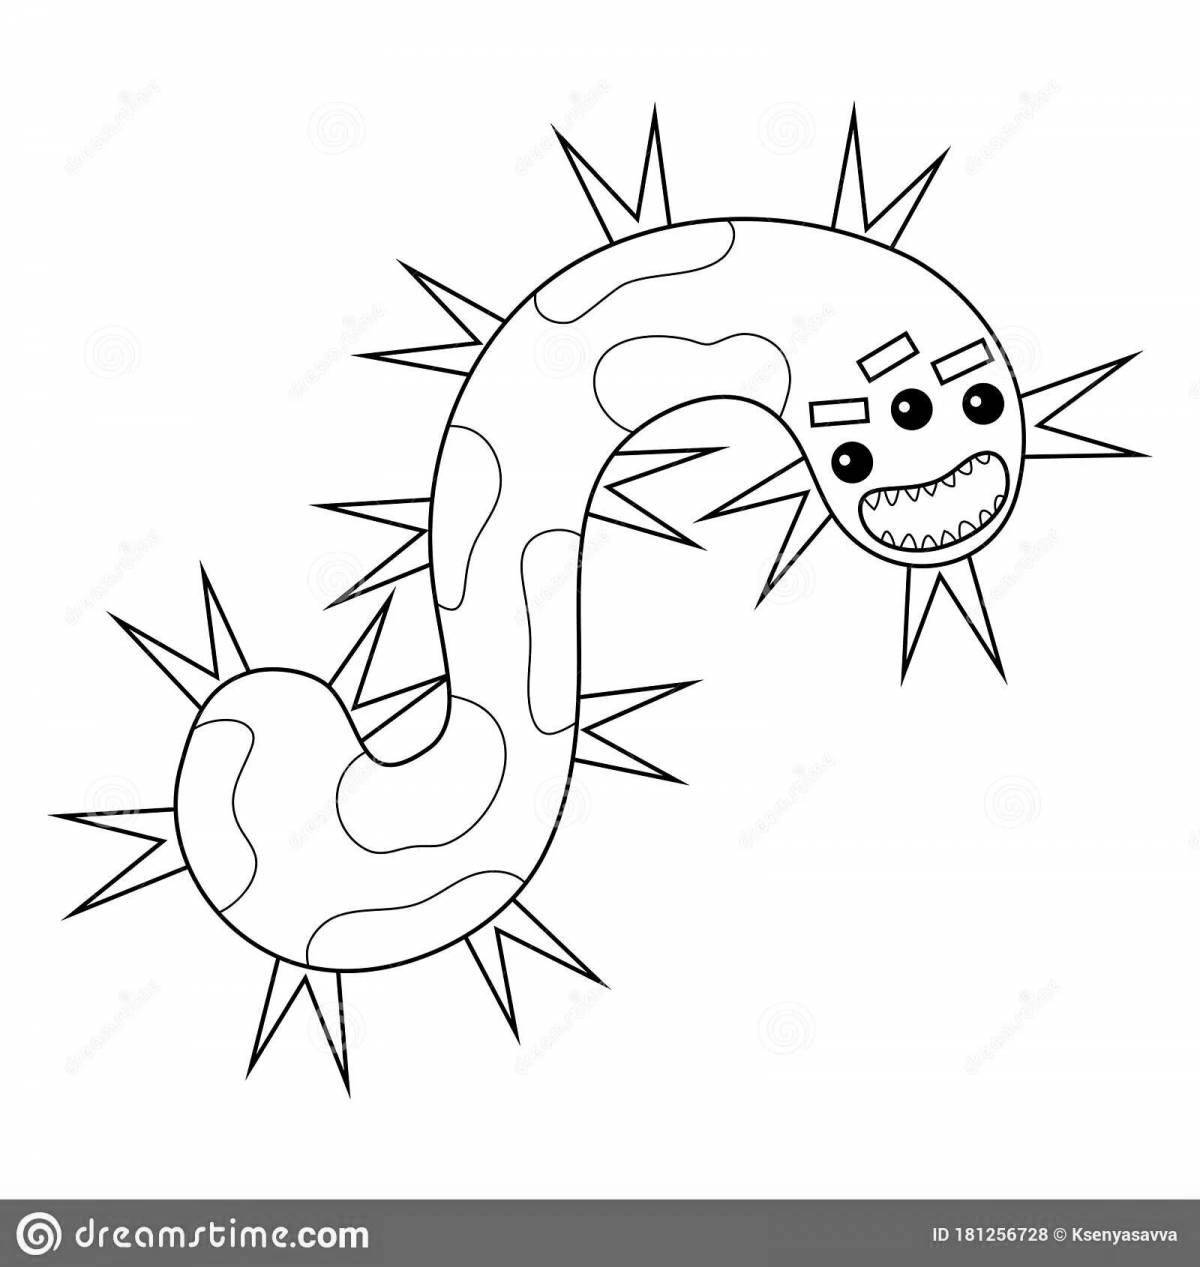 Exciting bacteria coloring page